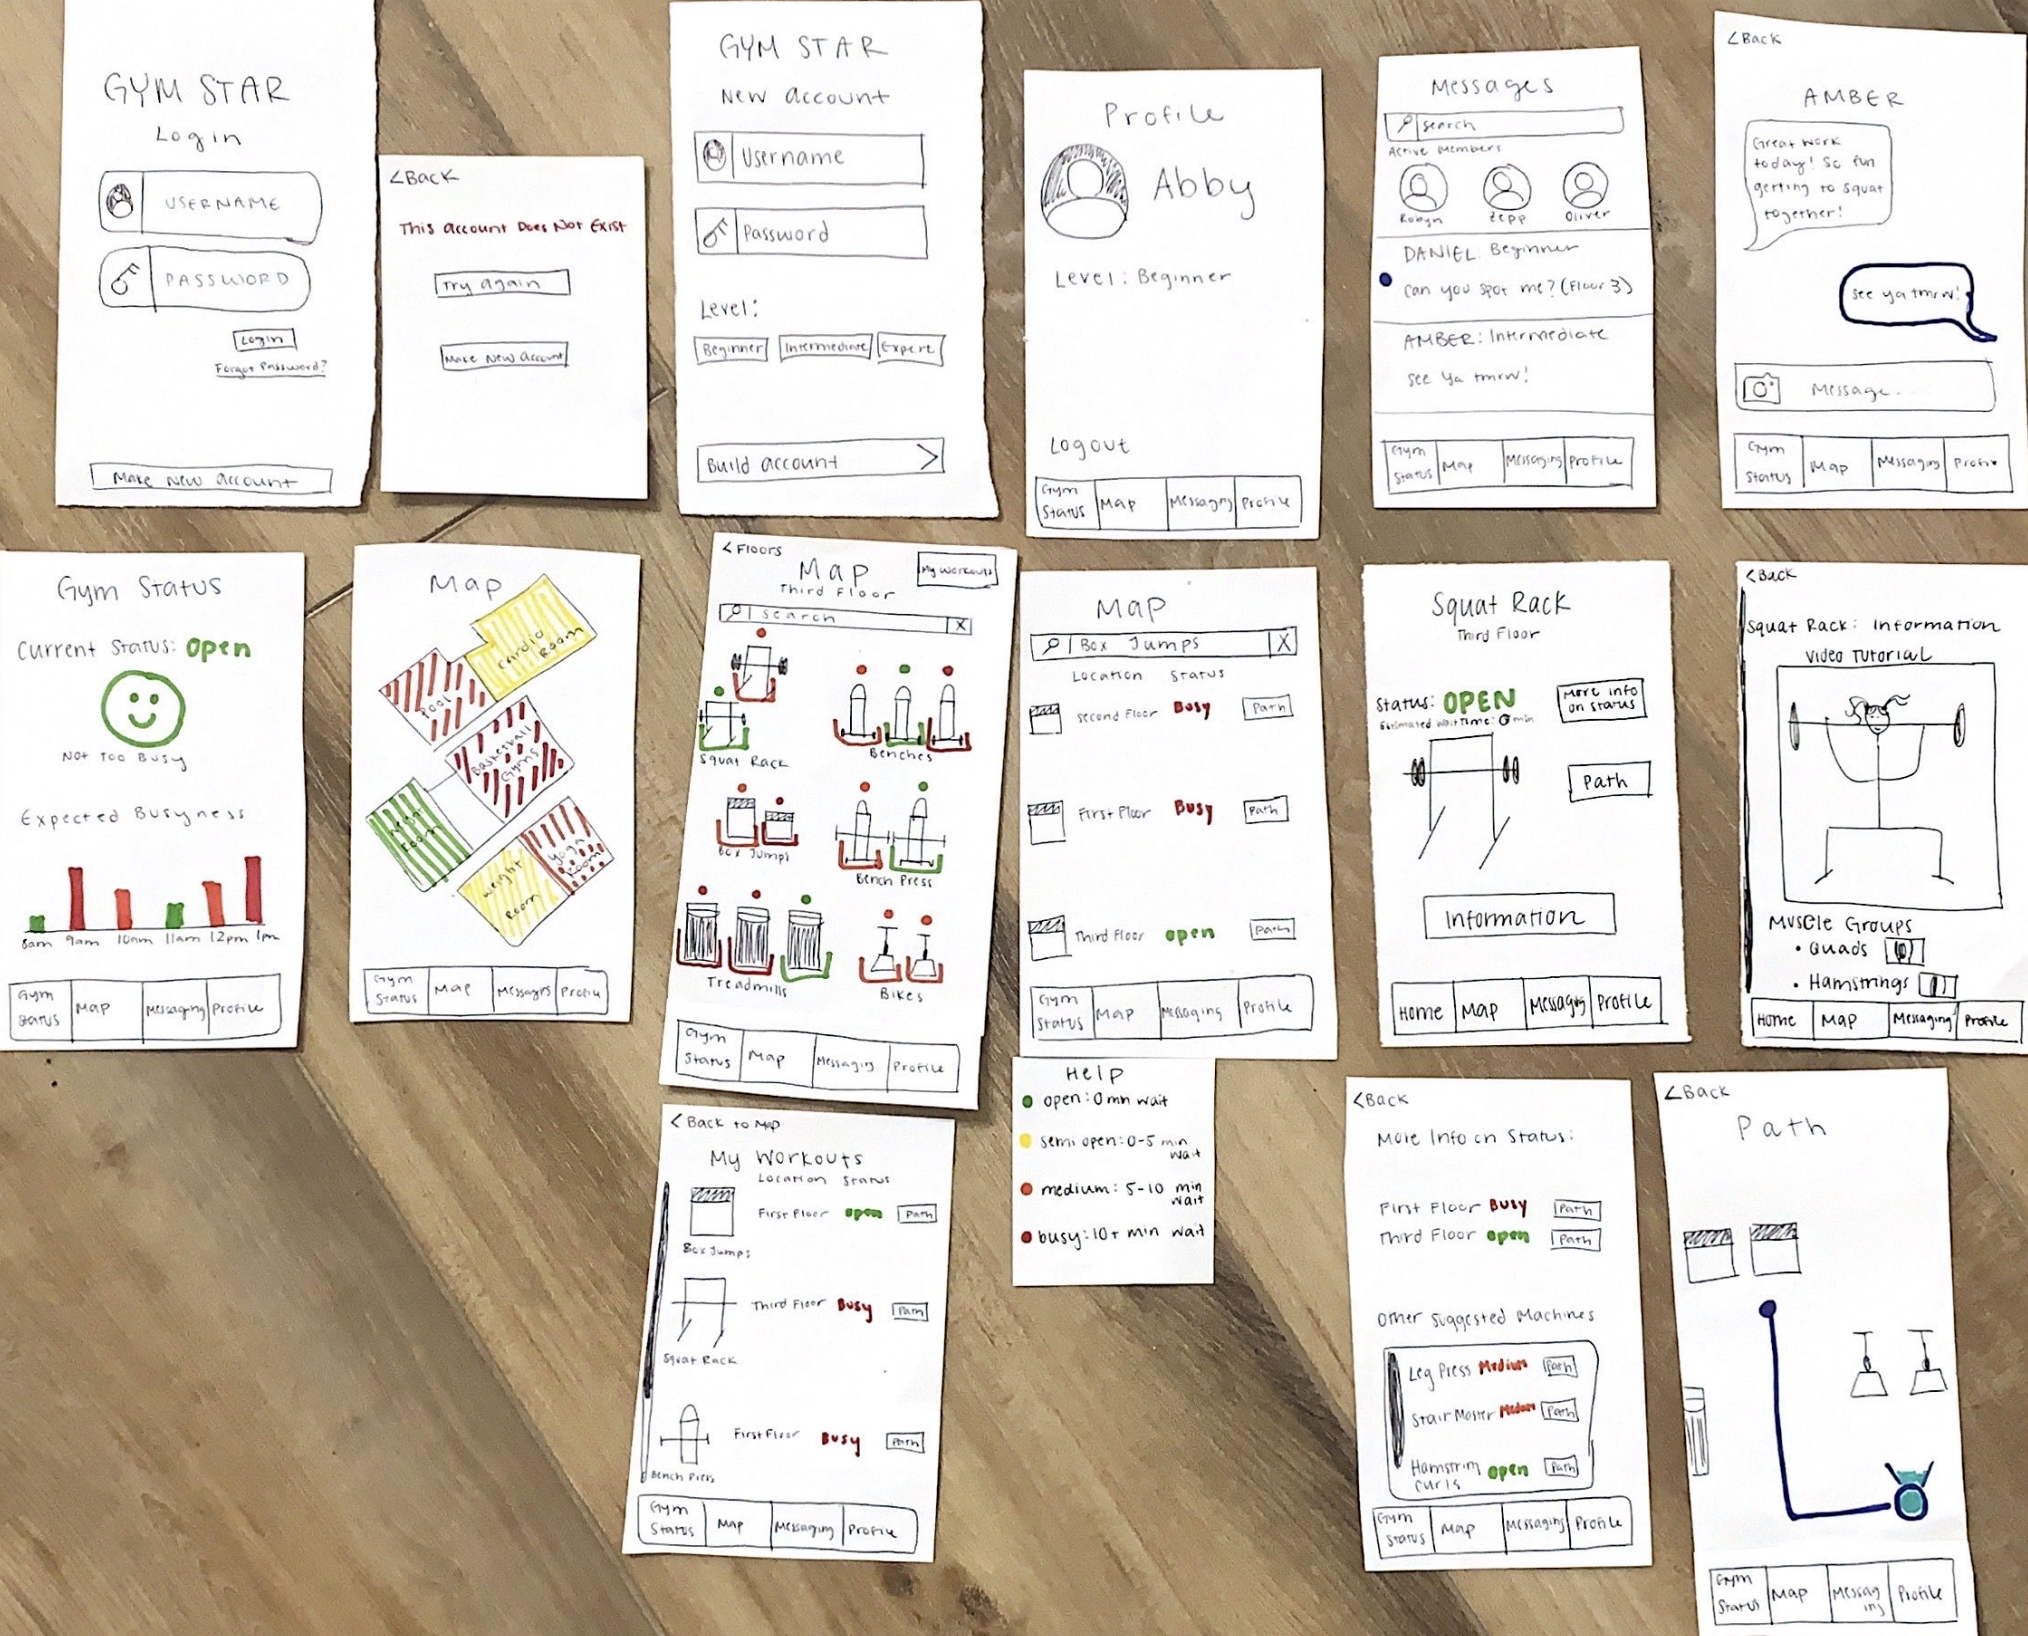 Our updated wireframes laid out to display each section of our revised application paper prototype.